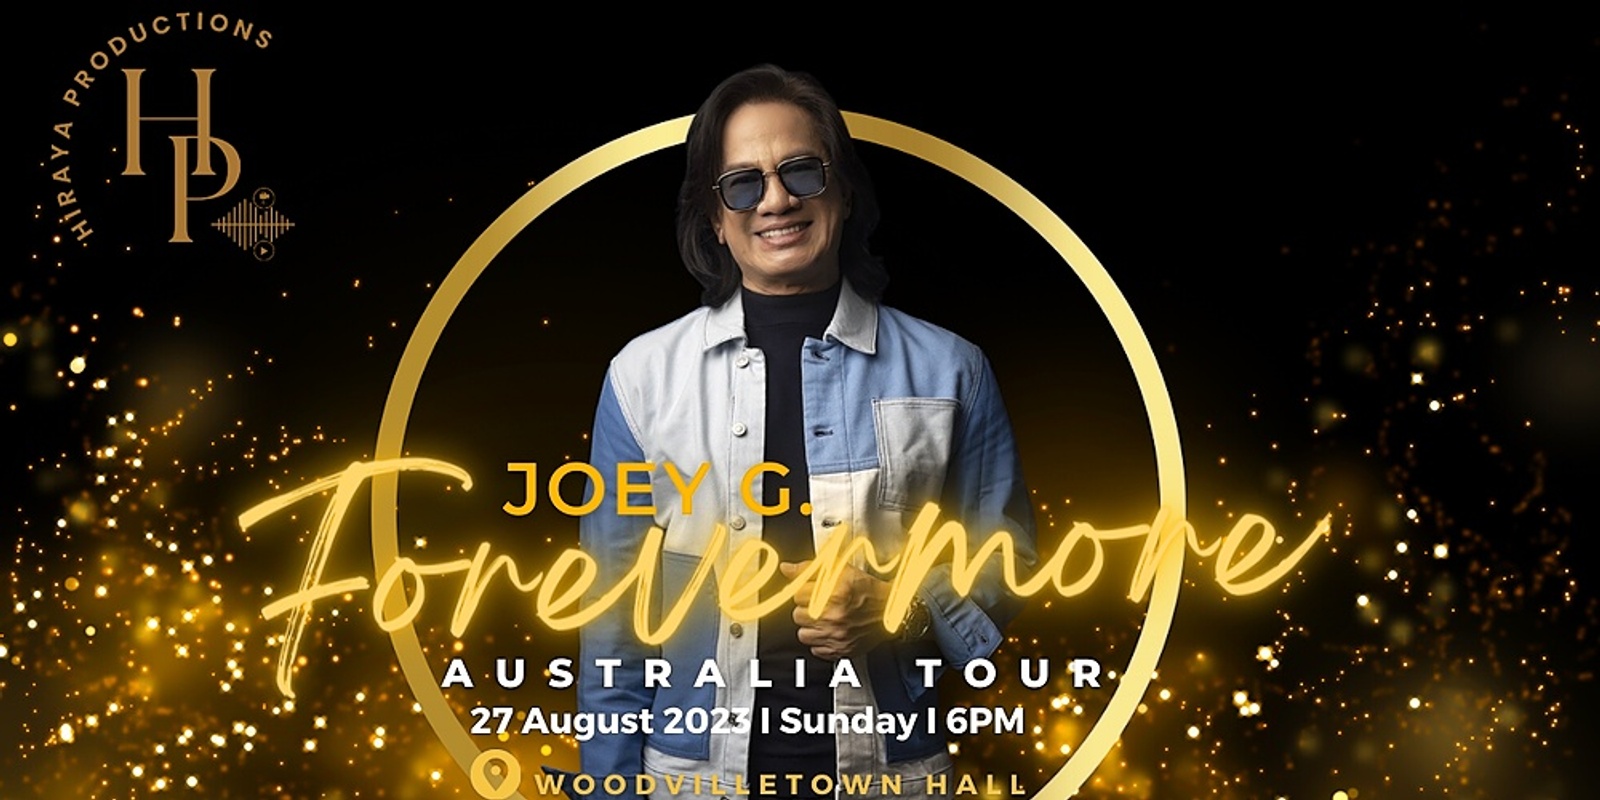 del dickinson recommends joeys world tour age pic